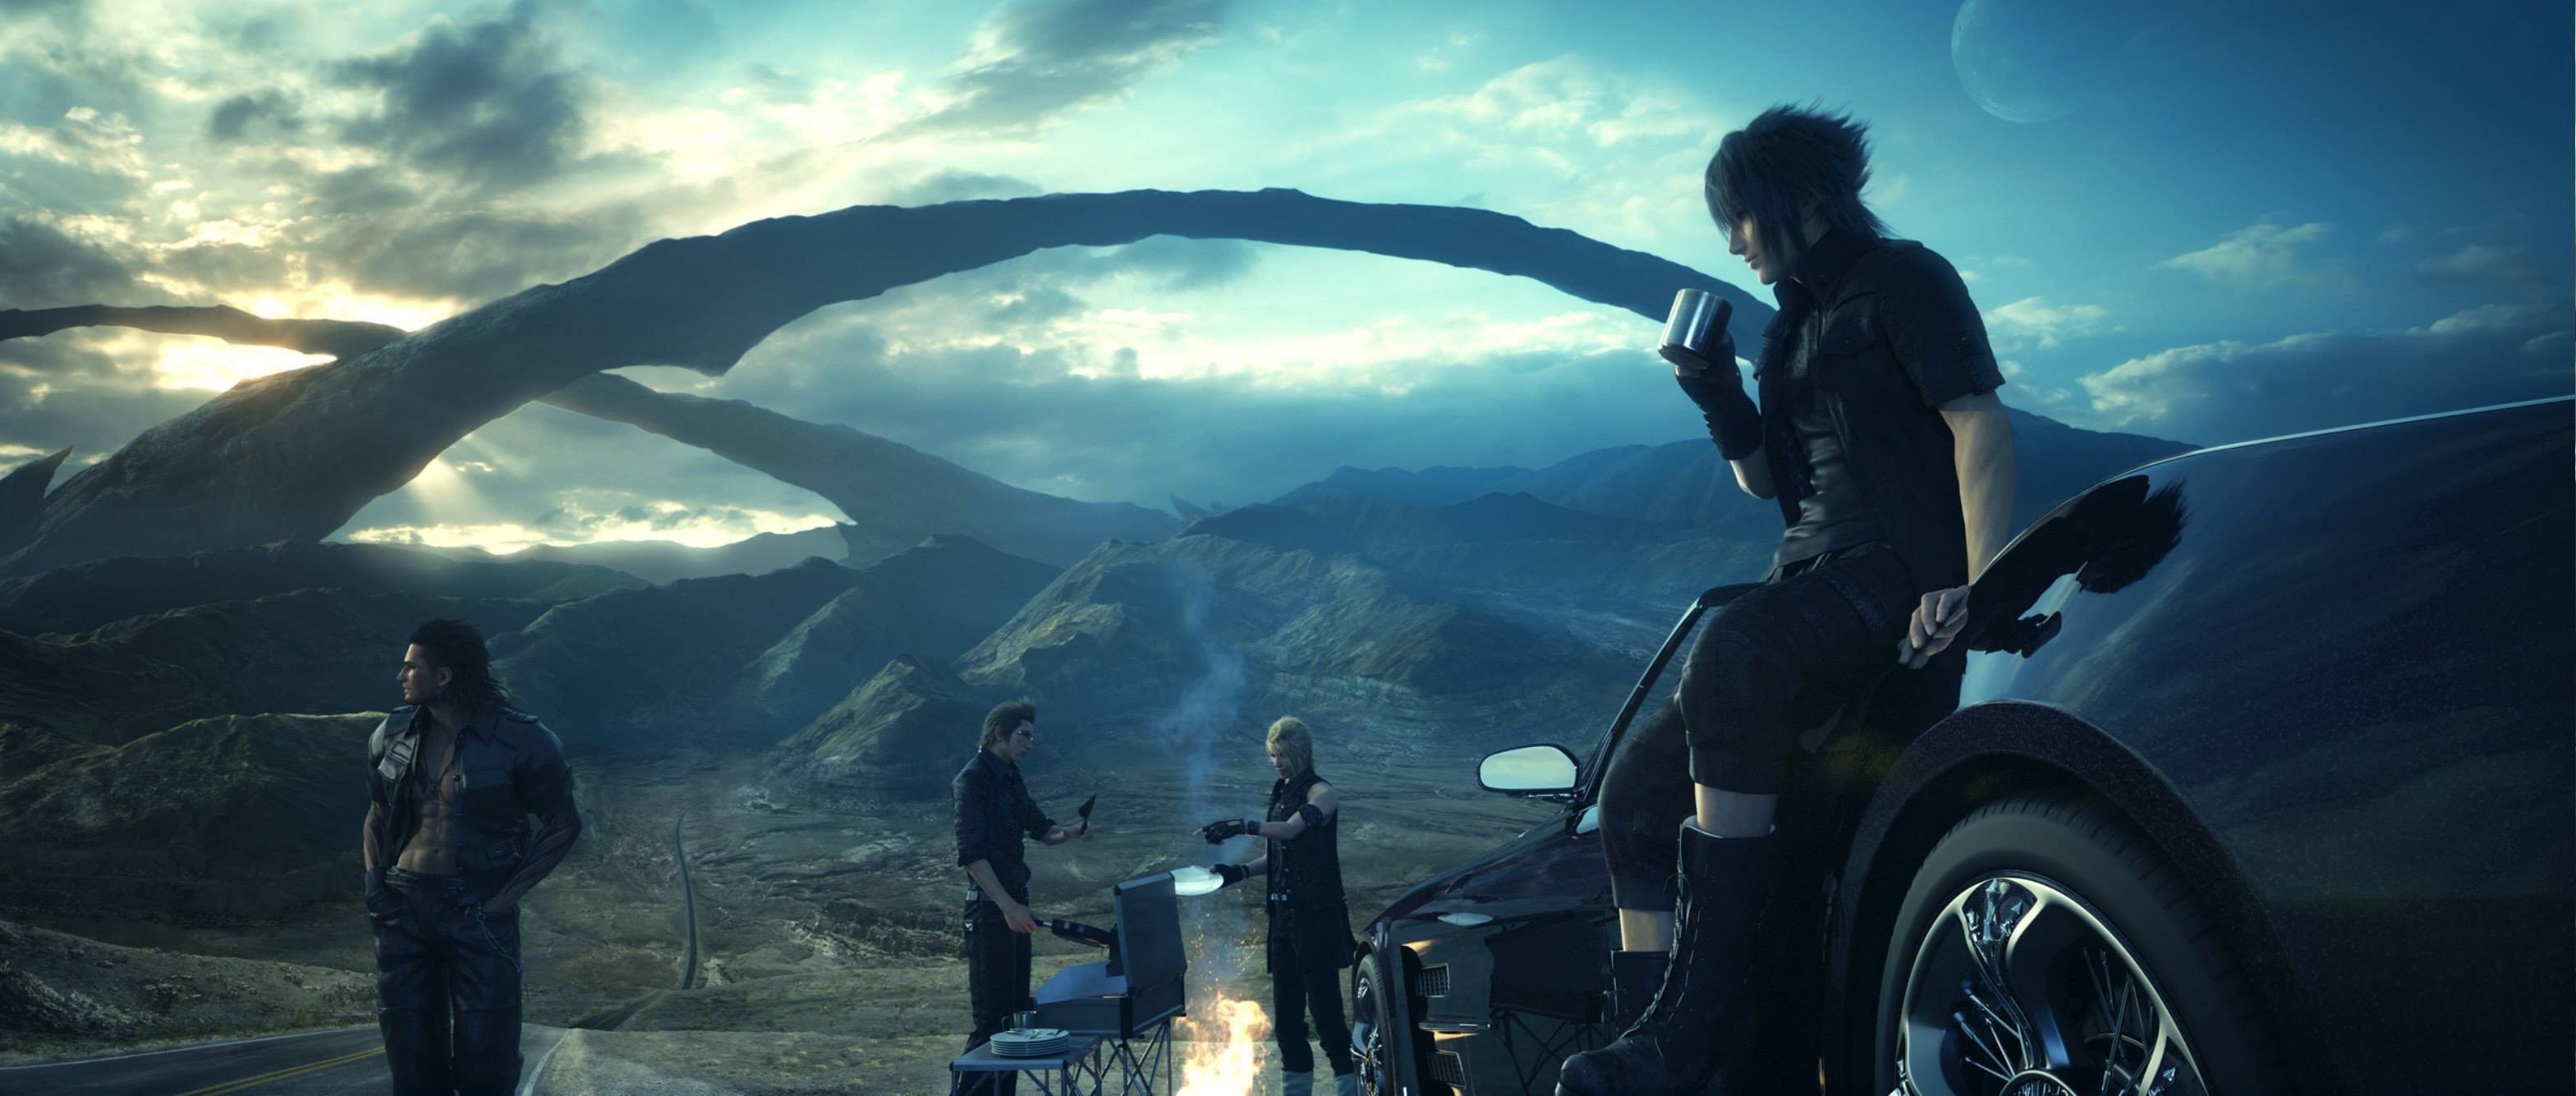 3137x1335 Final Fantasy 15 Noctis Wallpaper High Quality Resolution Is Cool Wallpapers